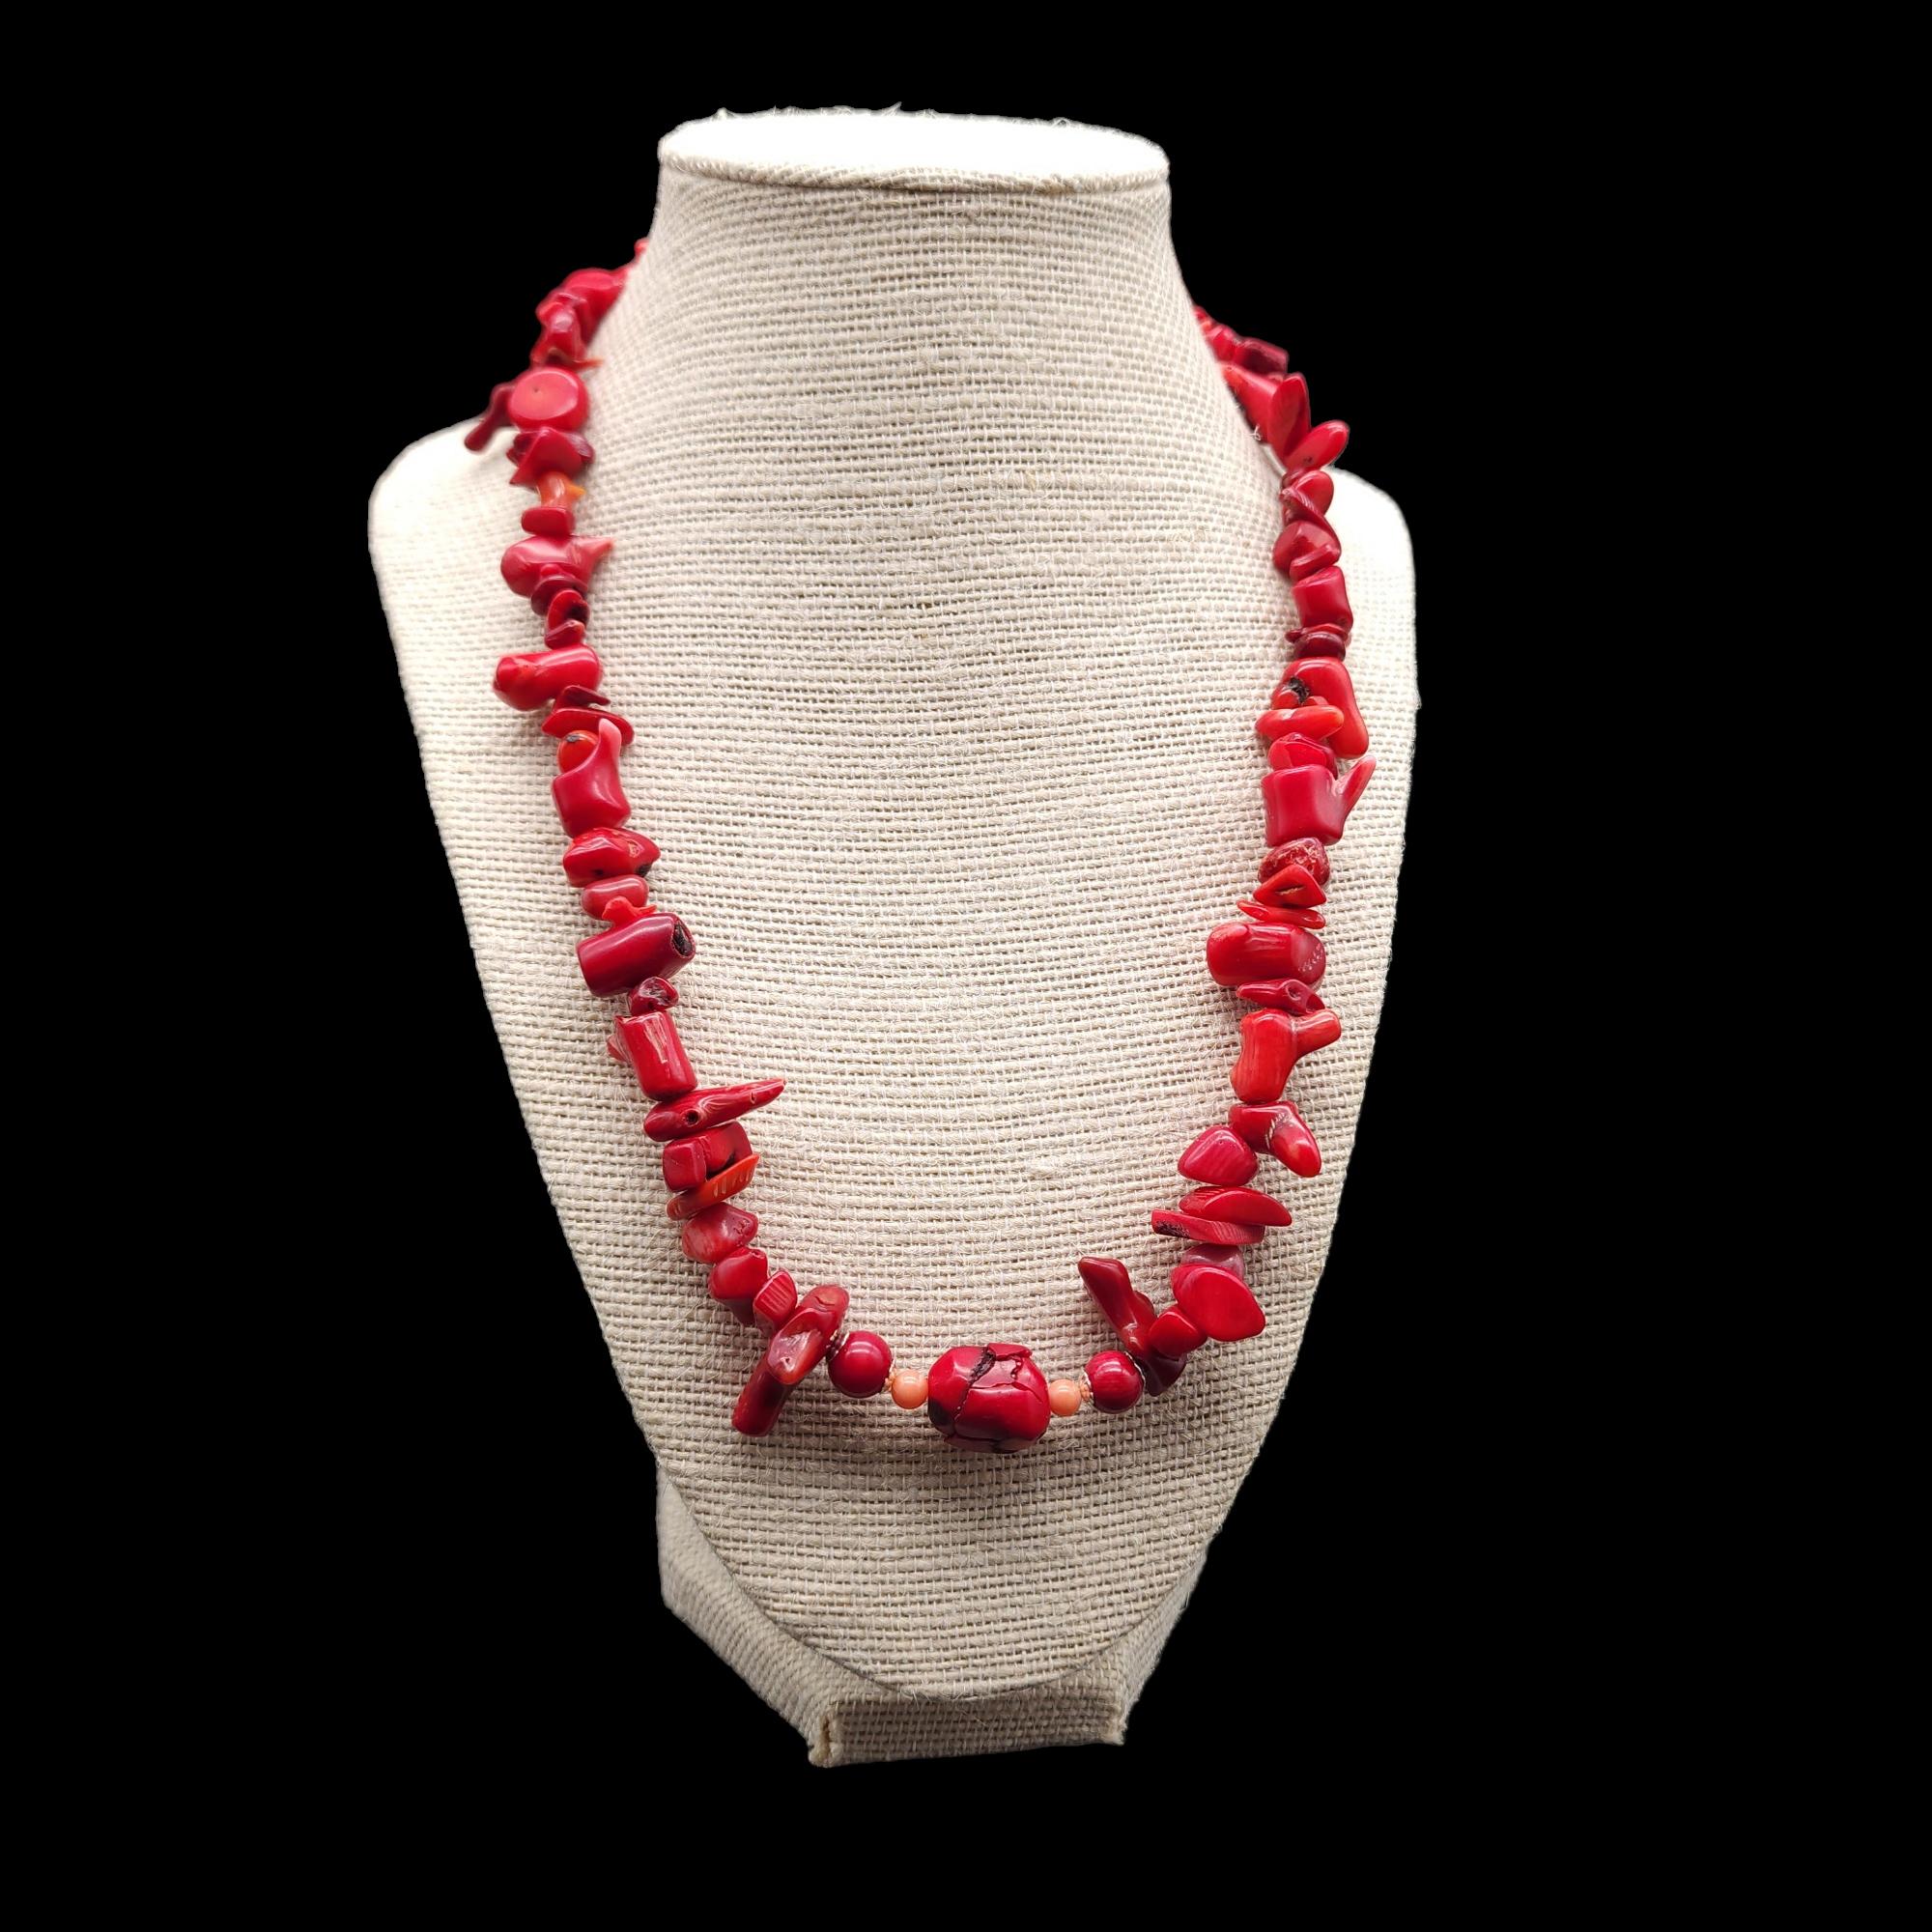 Add a touch of elegance and sophistication to your outfit with this stunning vintage red coral collar necklace. This necklace features natural red coral of various shapes and sizes, creating a beautiful contrast with the decorative sterling silver